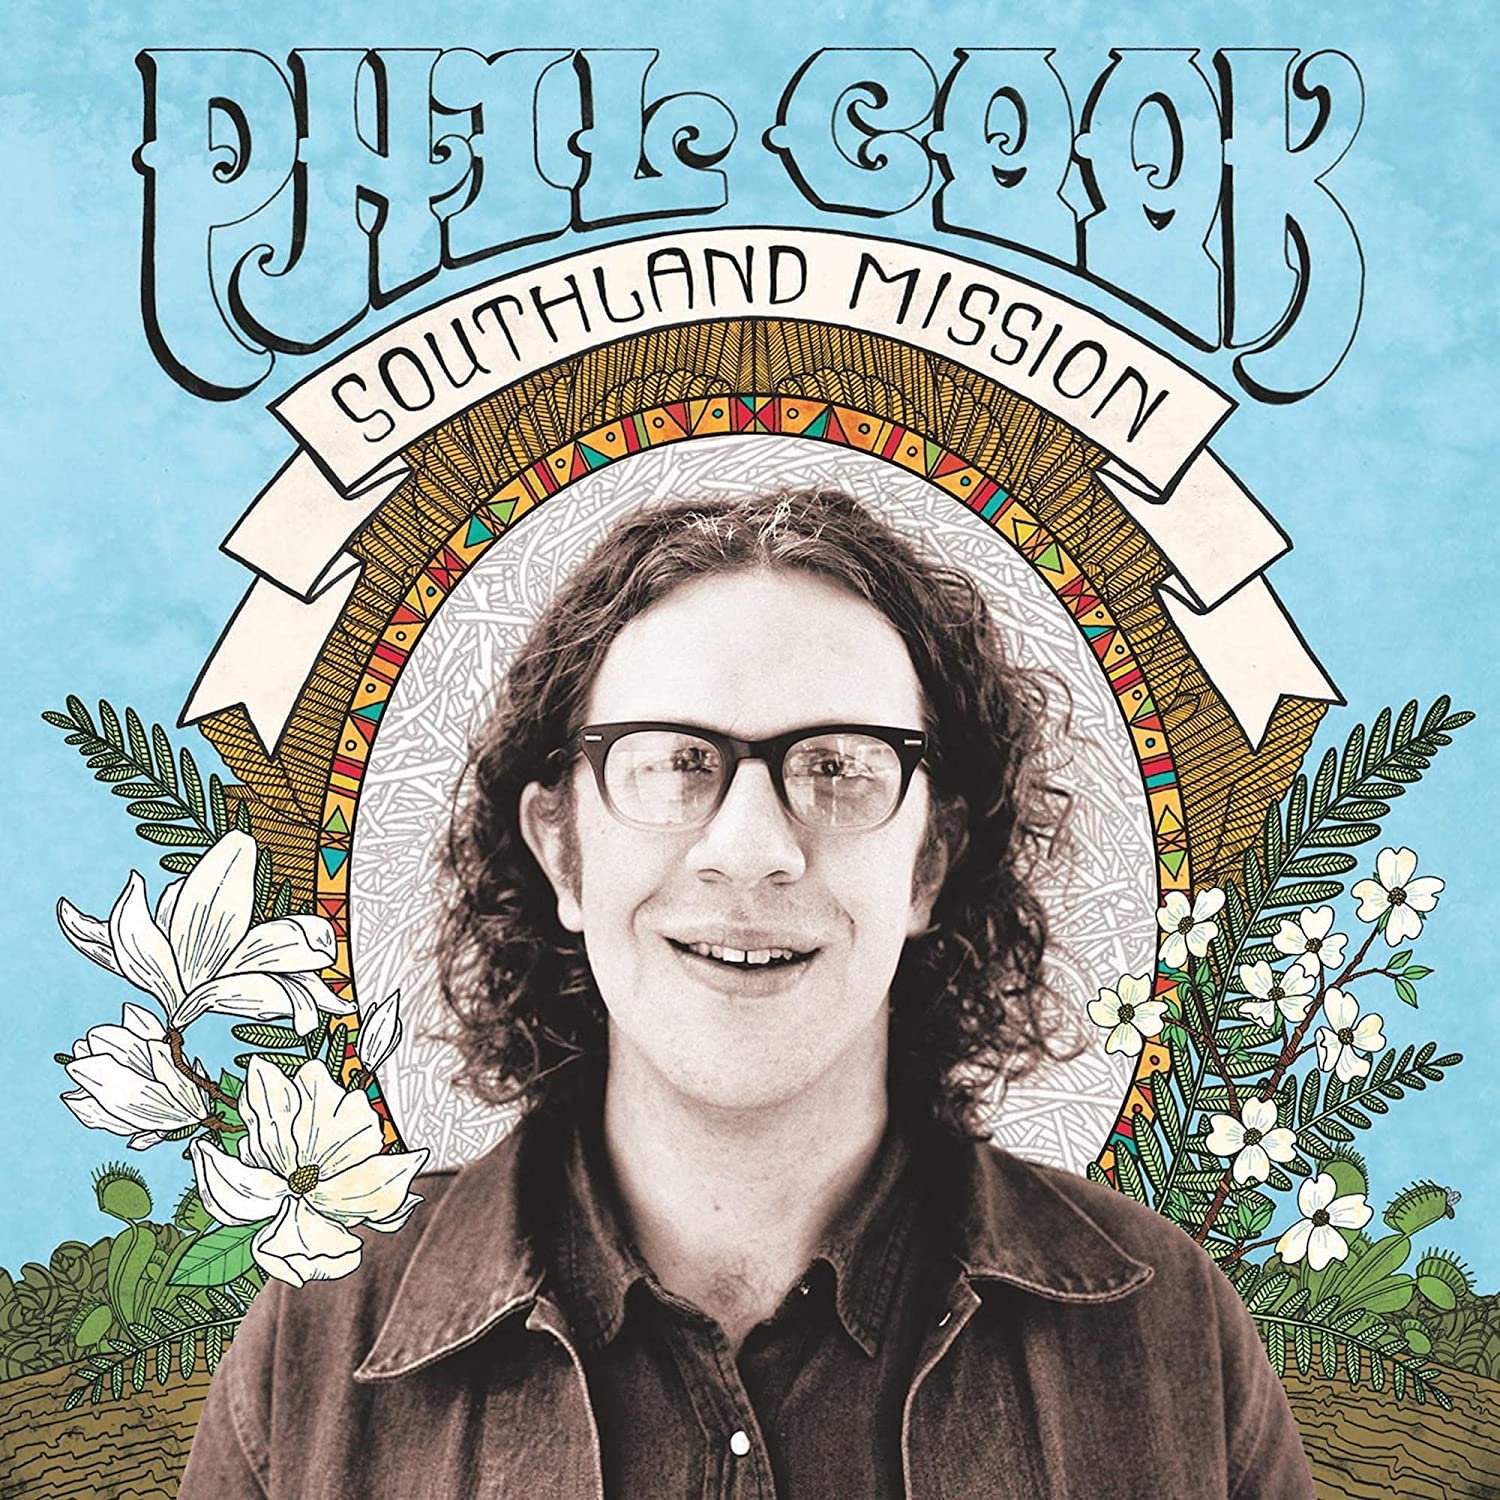 phil cook - southland mission.jpg